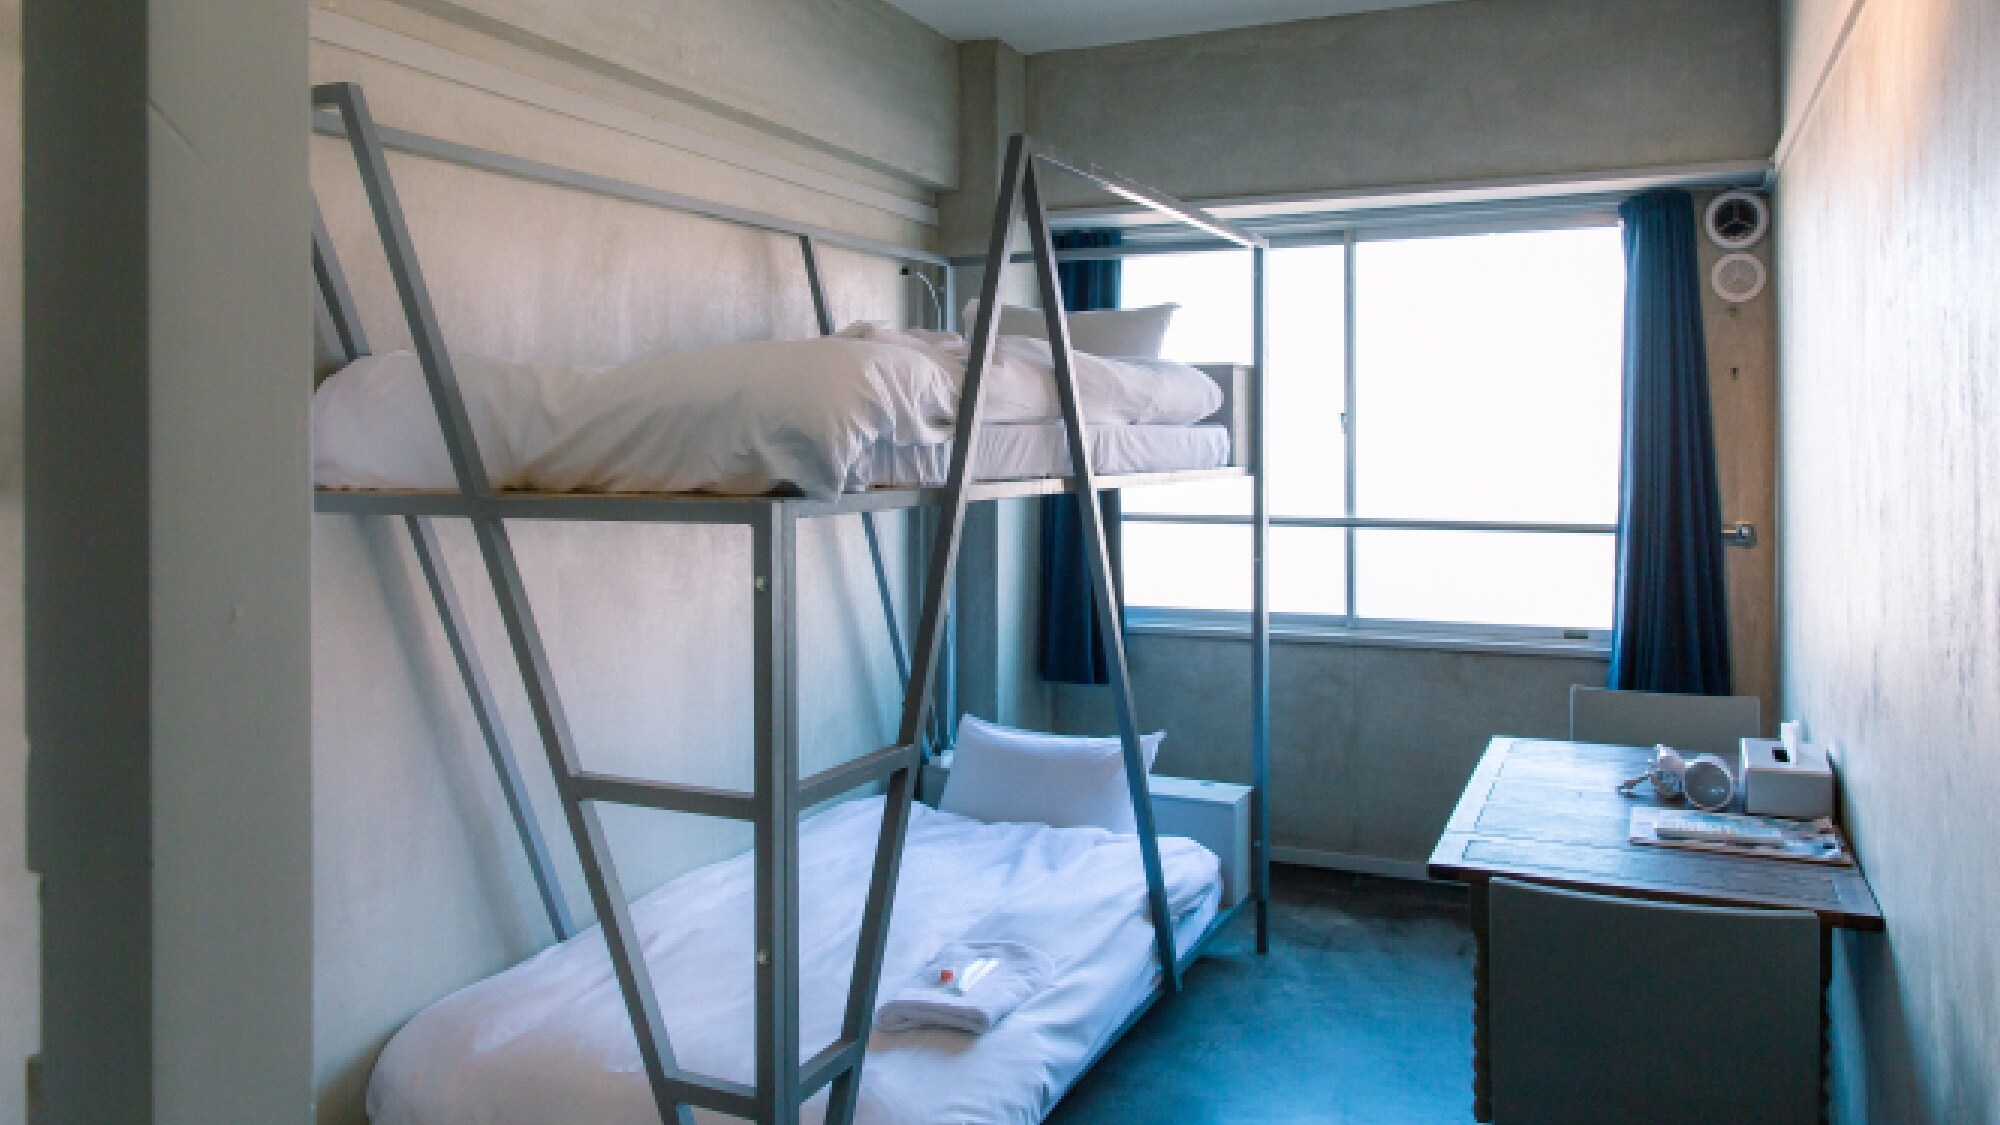 ・[Private bunk bed room/bed] The room can be used widely with bunk beds.